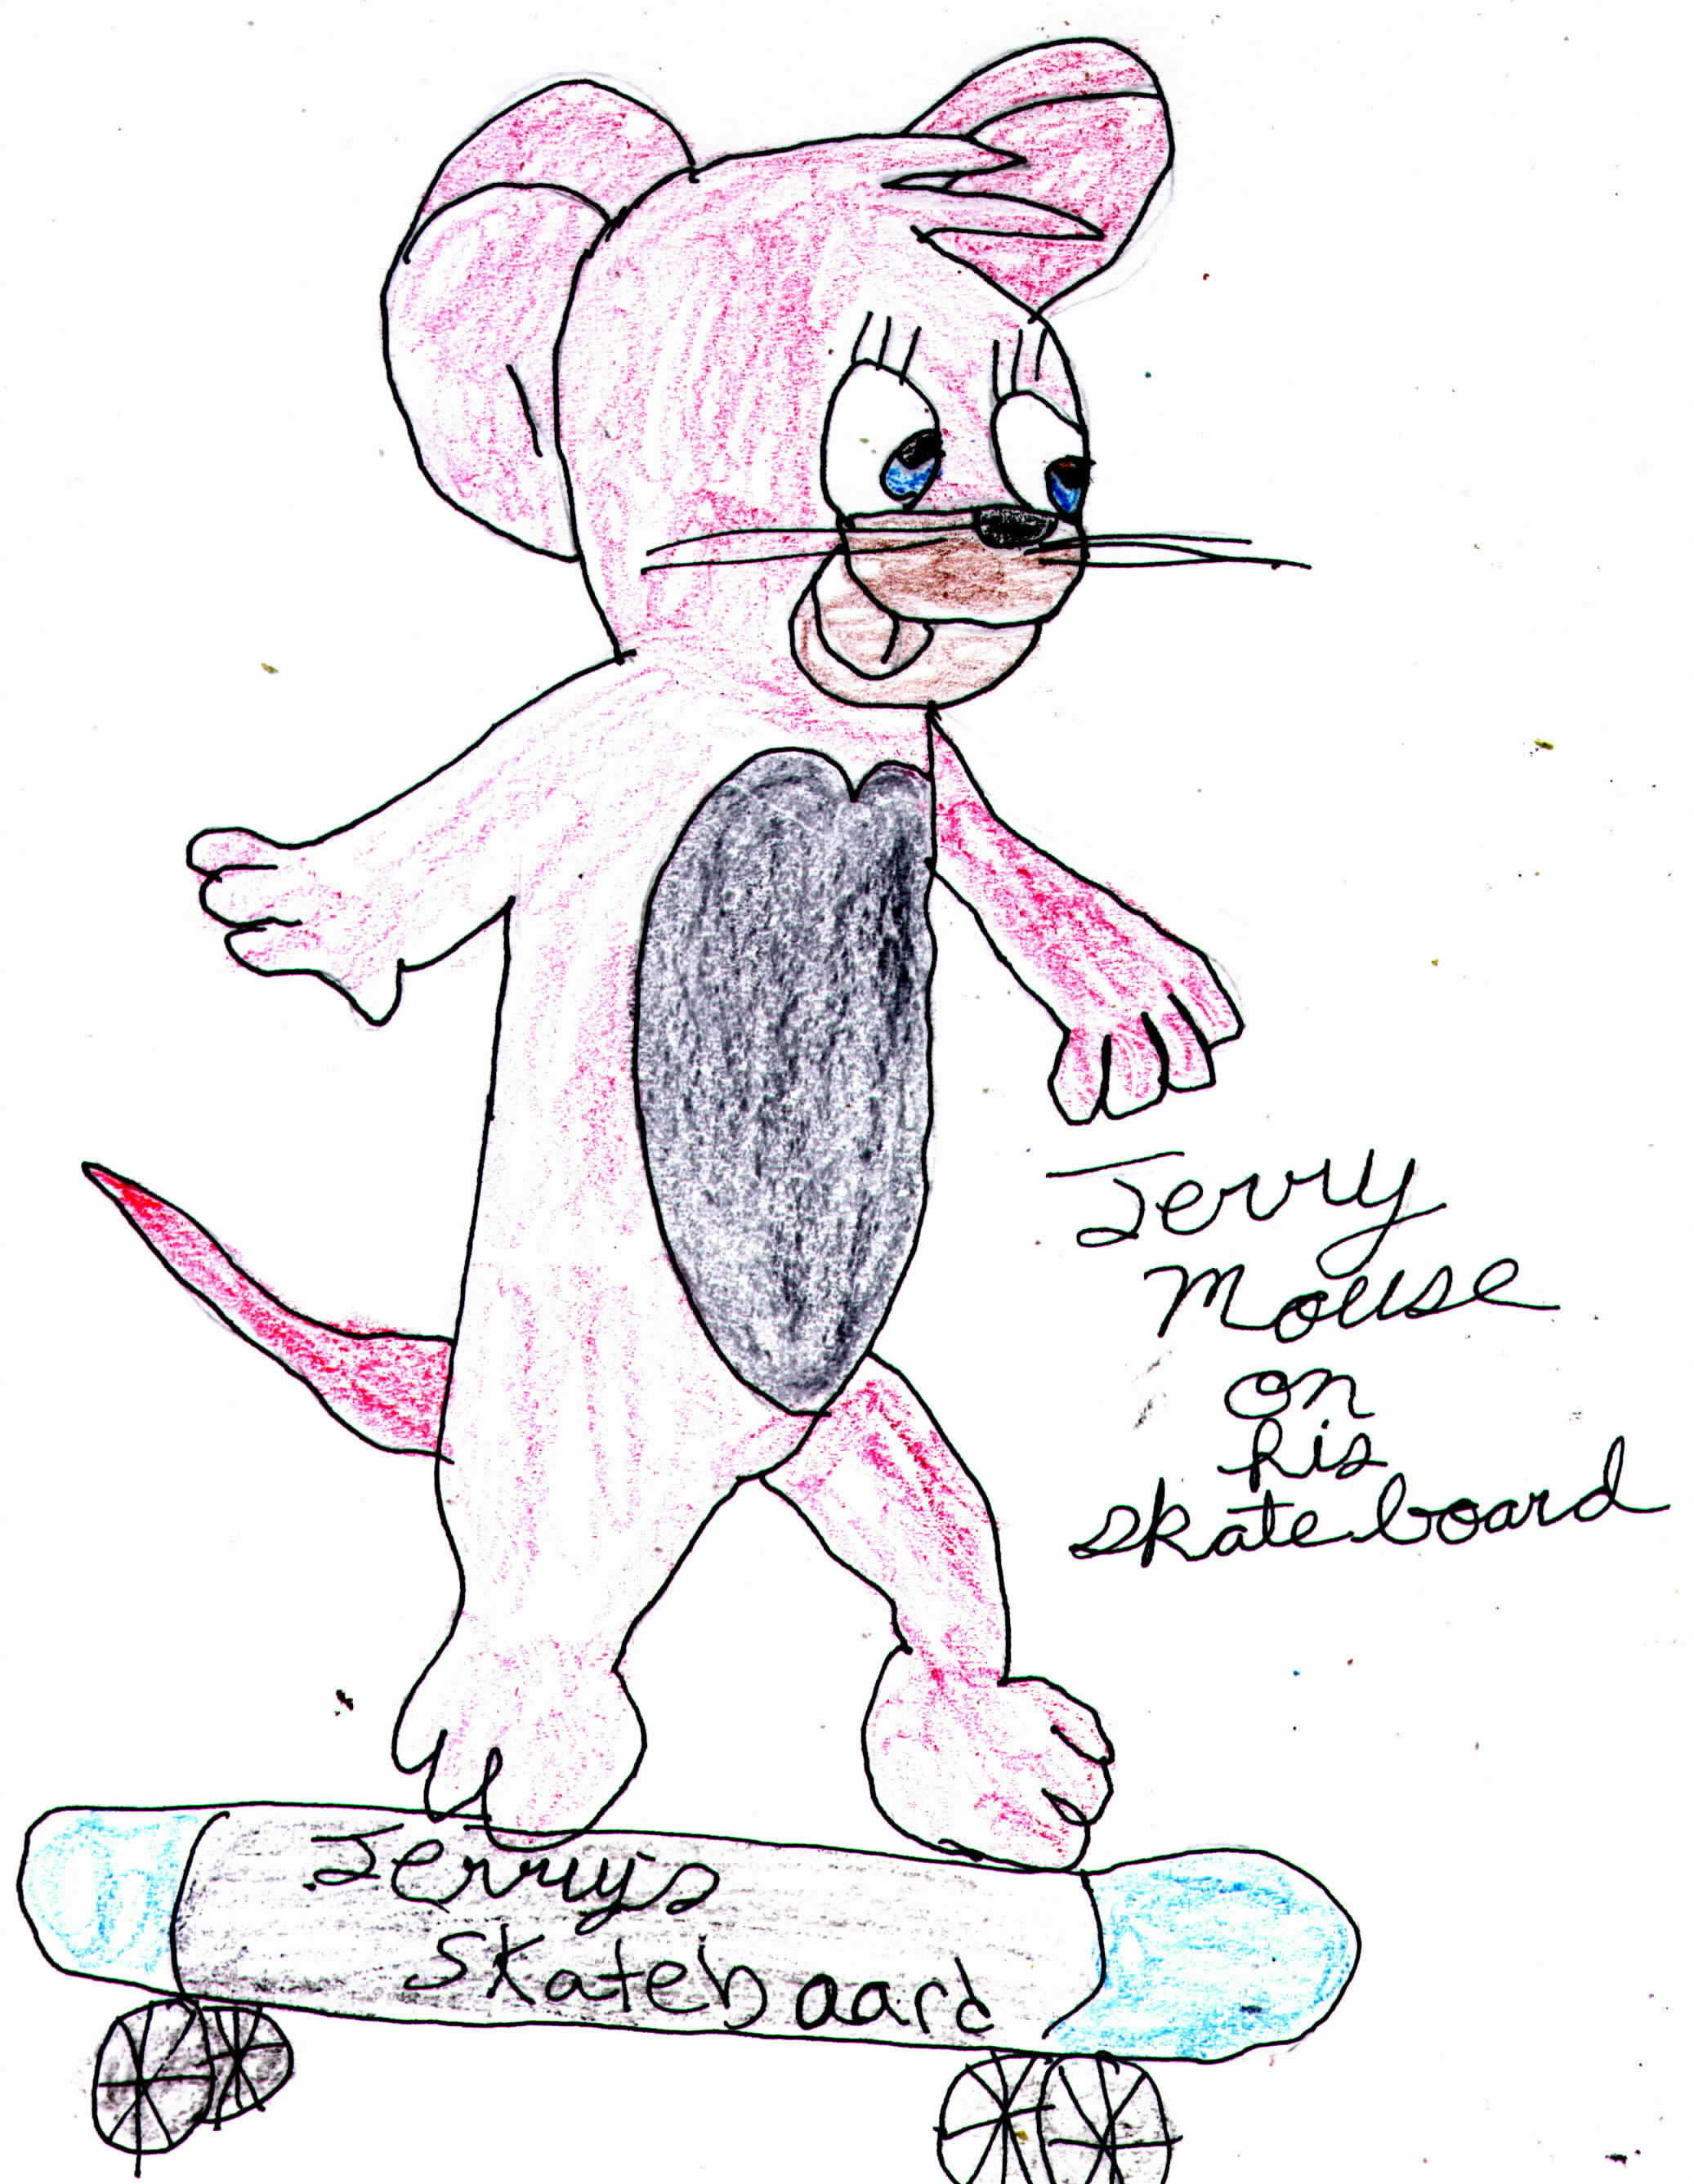 jerry mouse by patrick